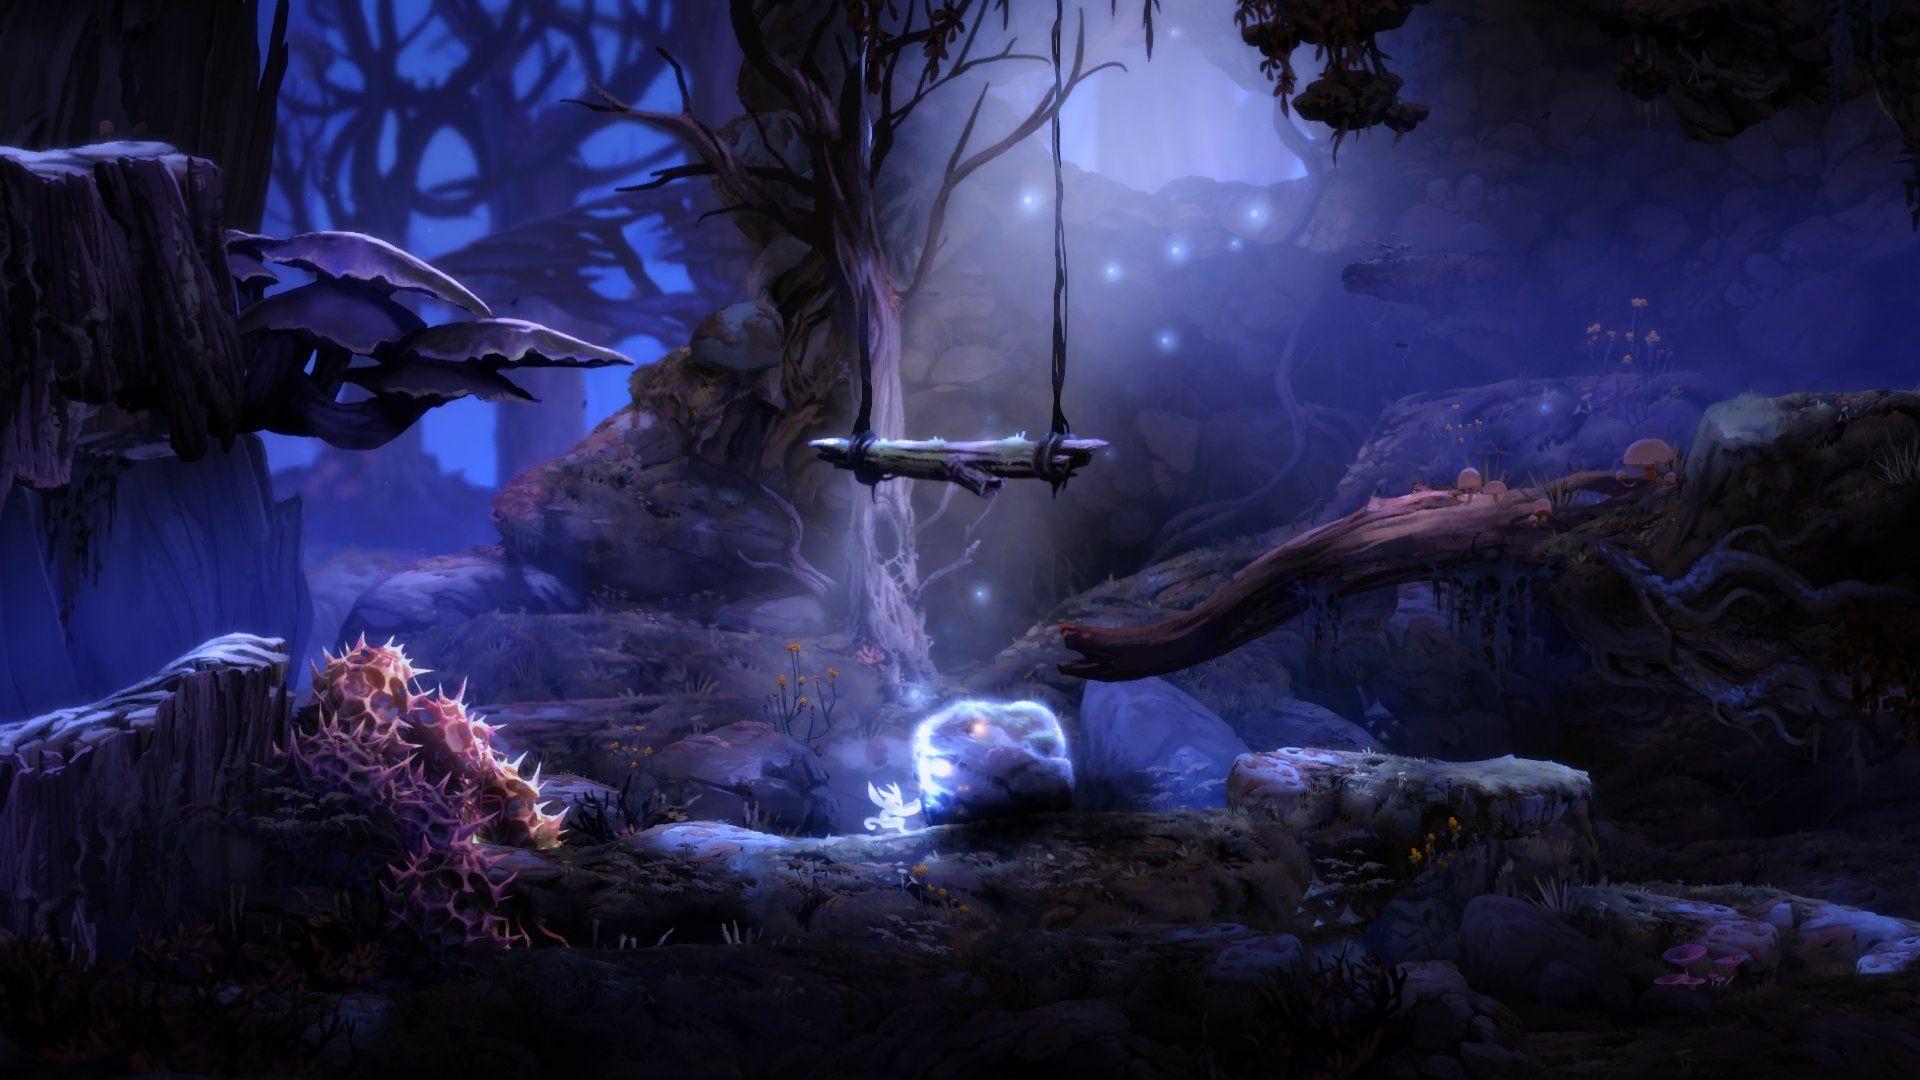 Ori And The Blind Forest Computer Wallpaper, Desktop Background